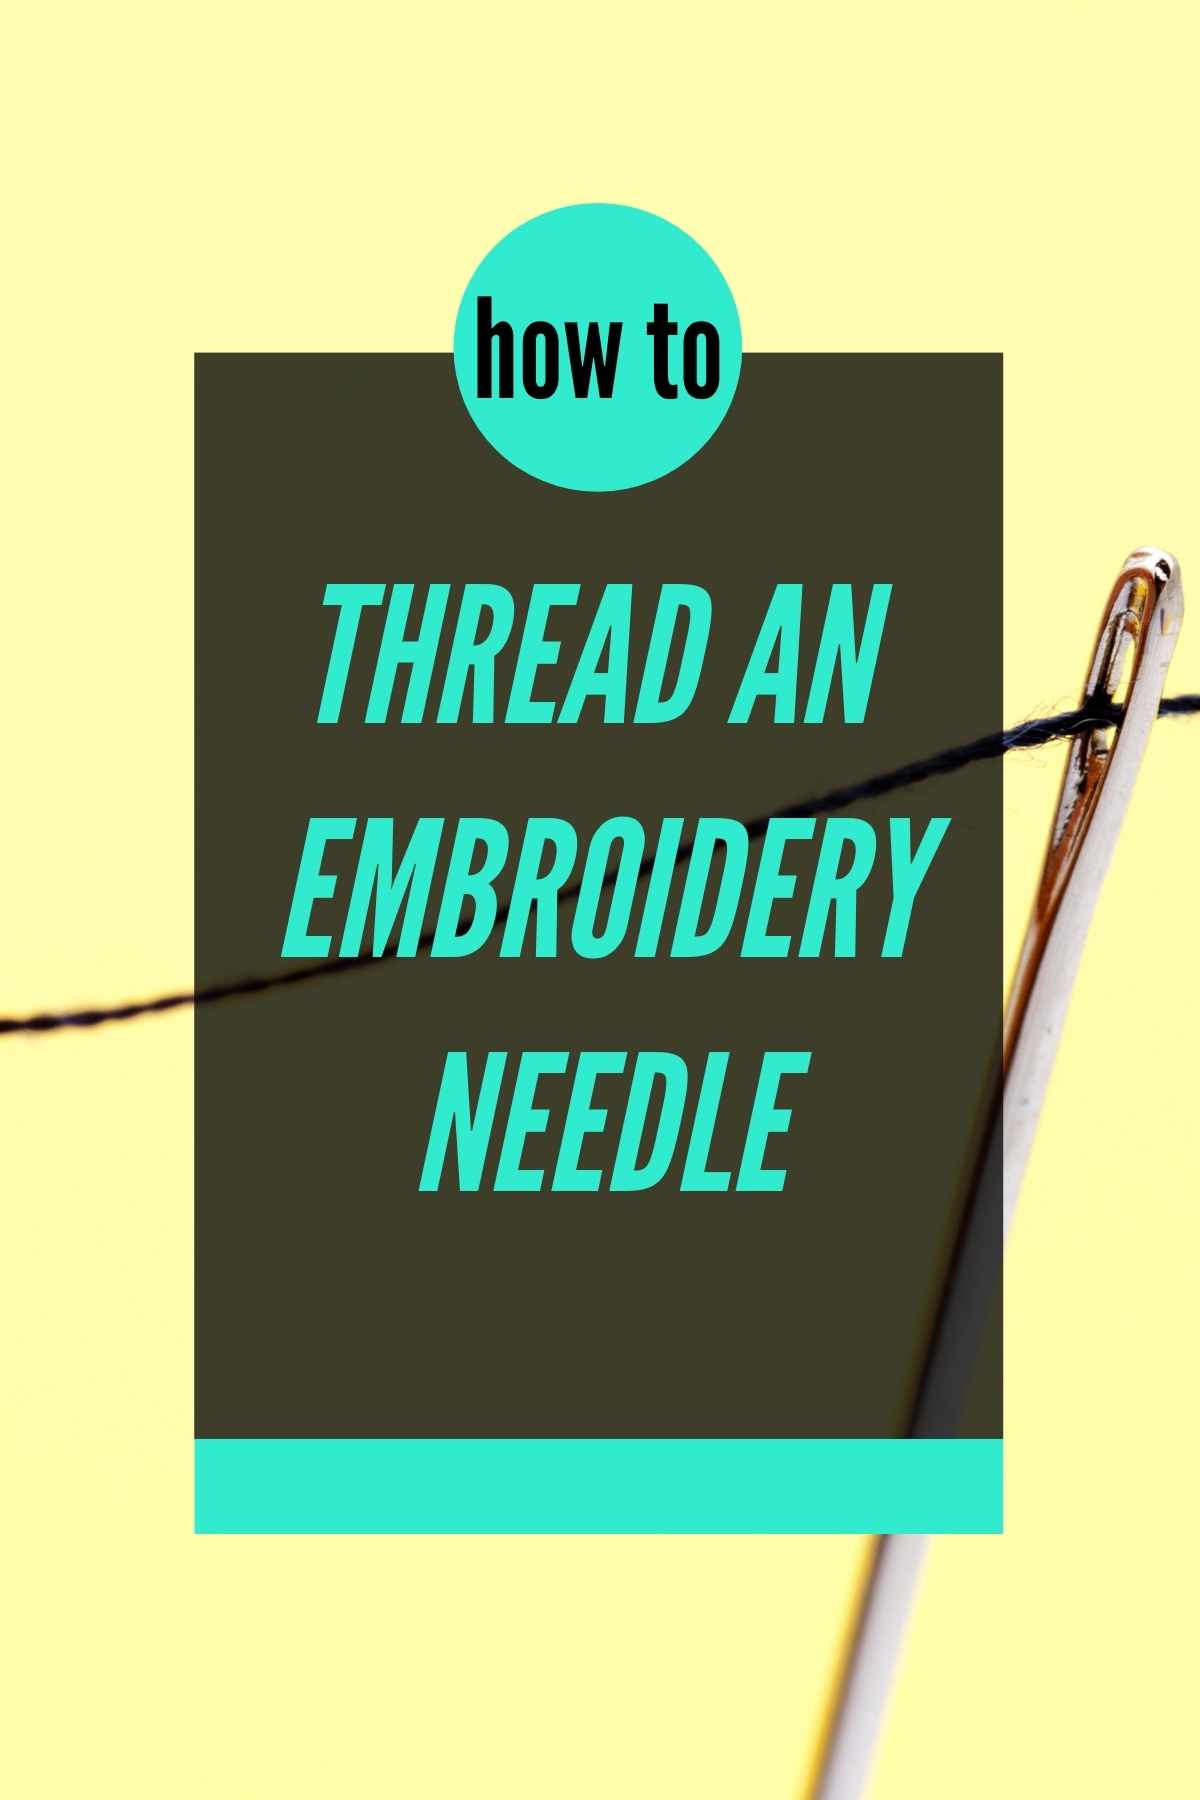 How to thread an embroidery needle